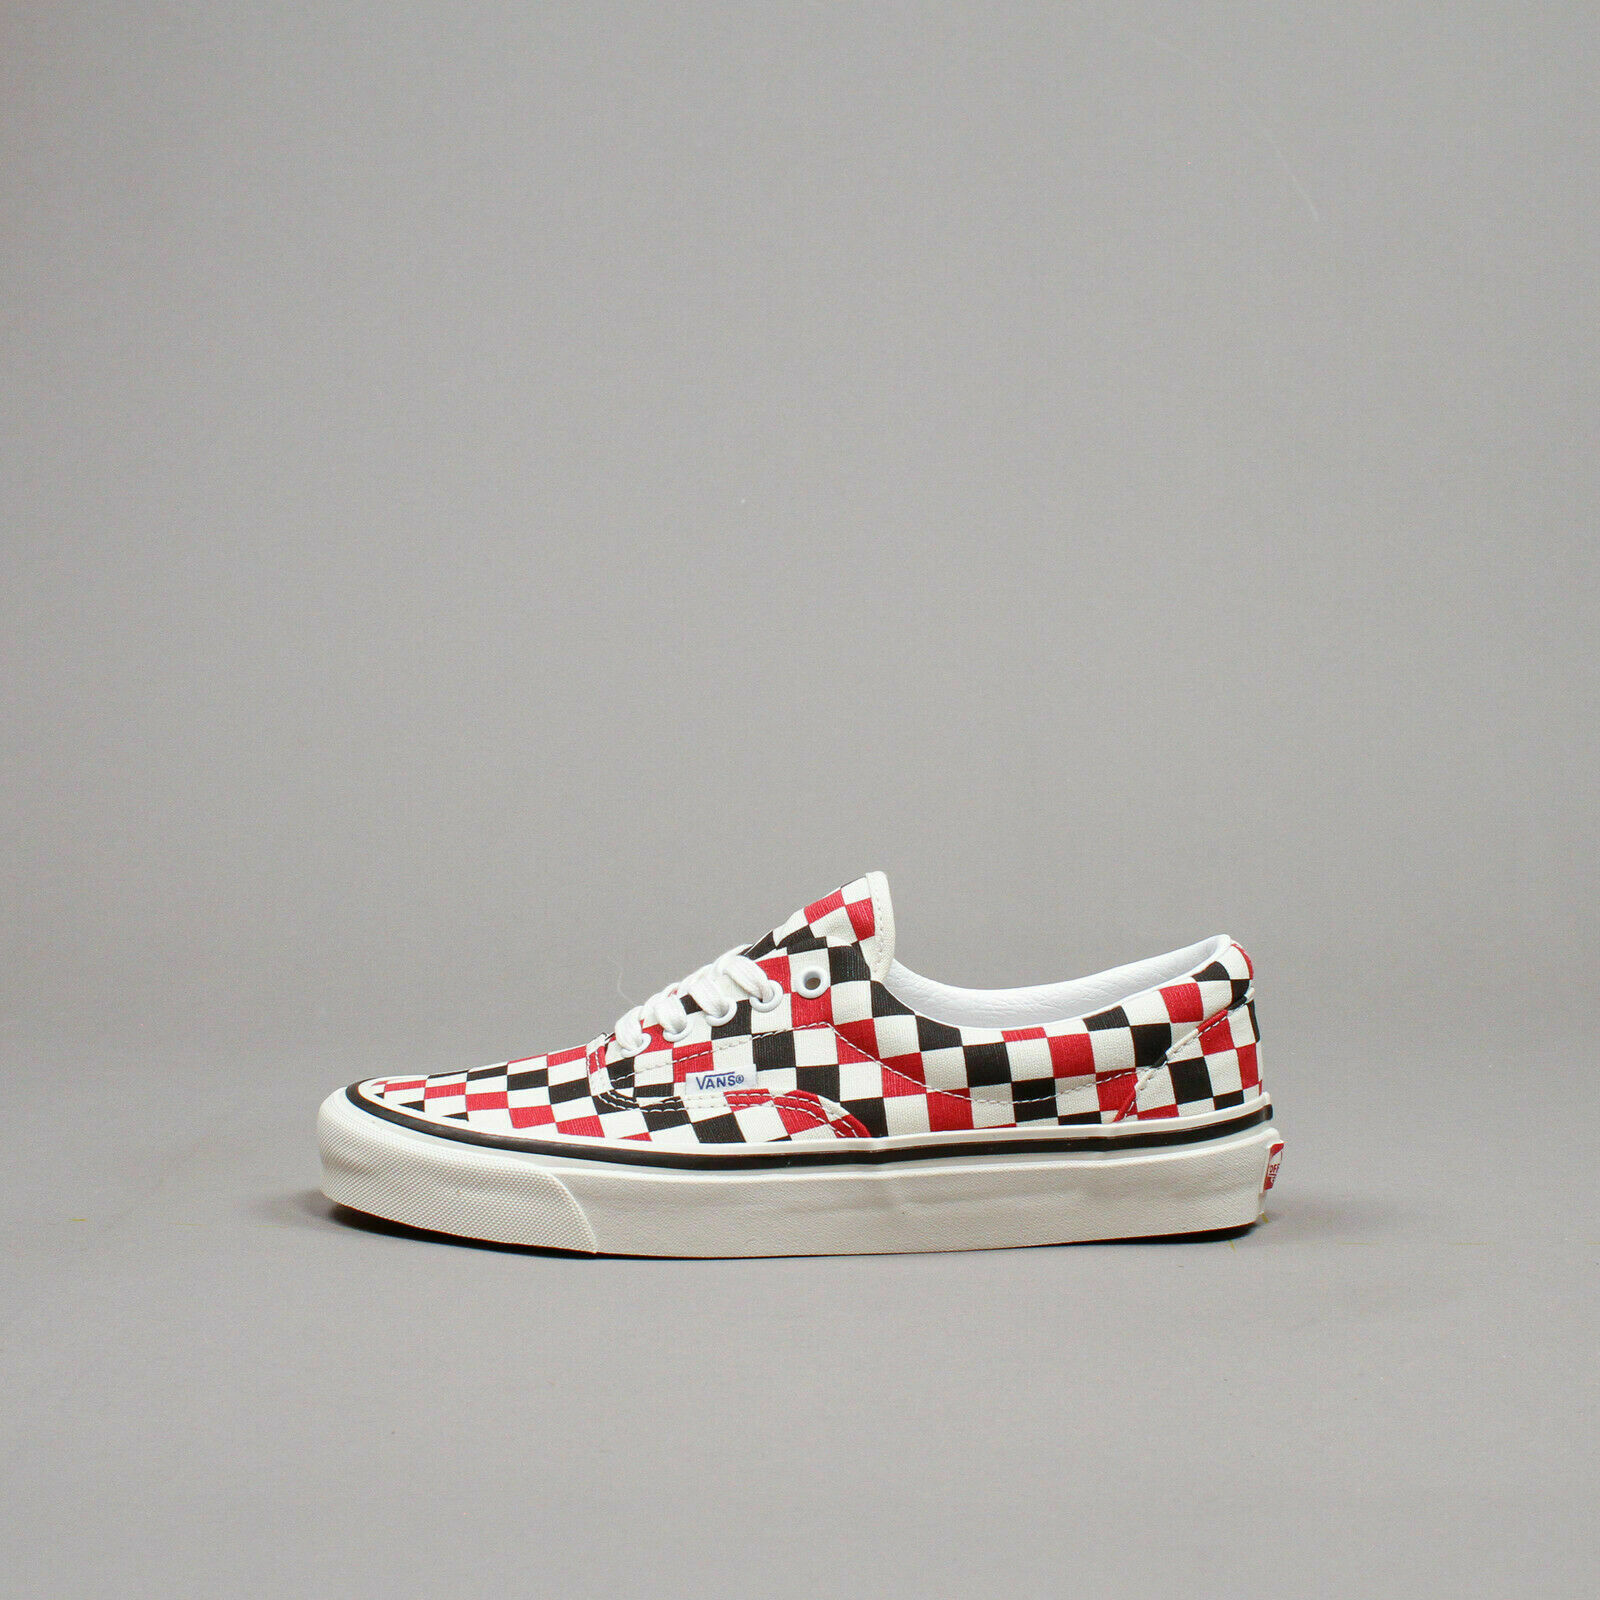 red and black check vans